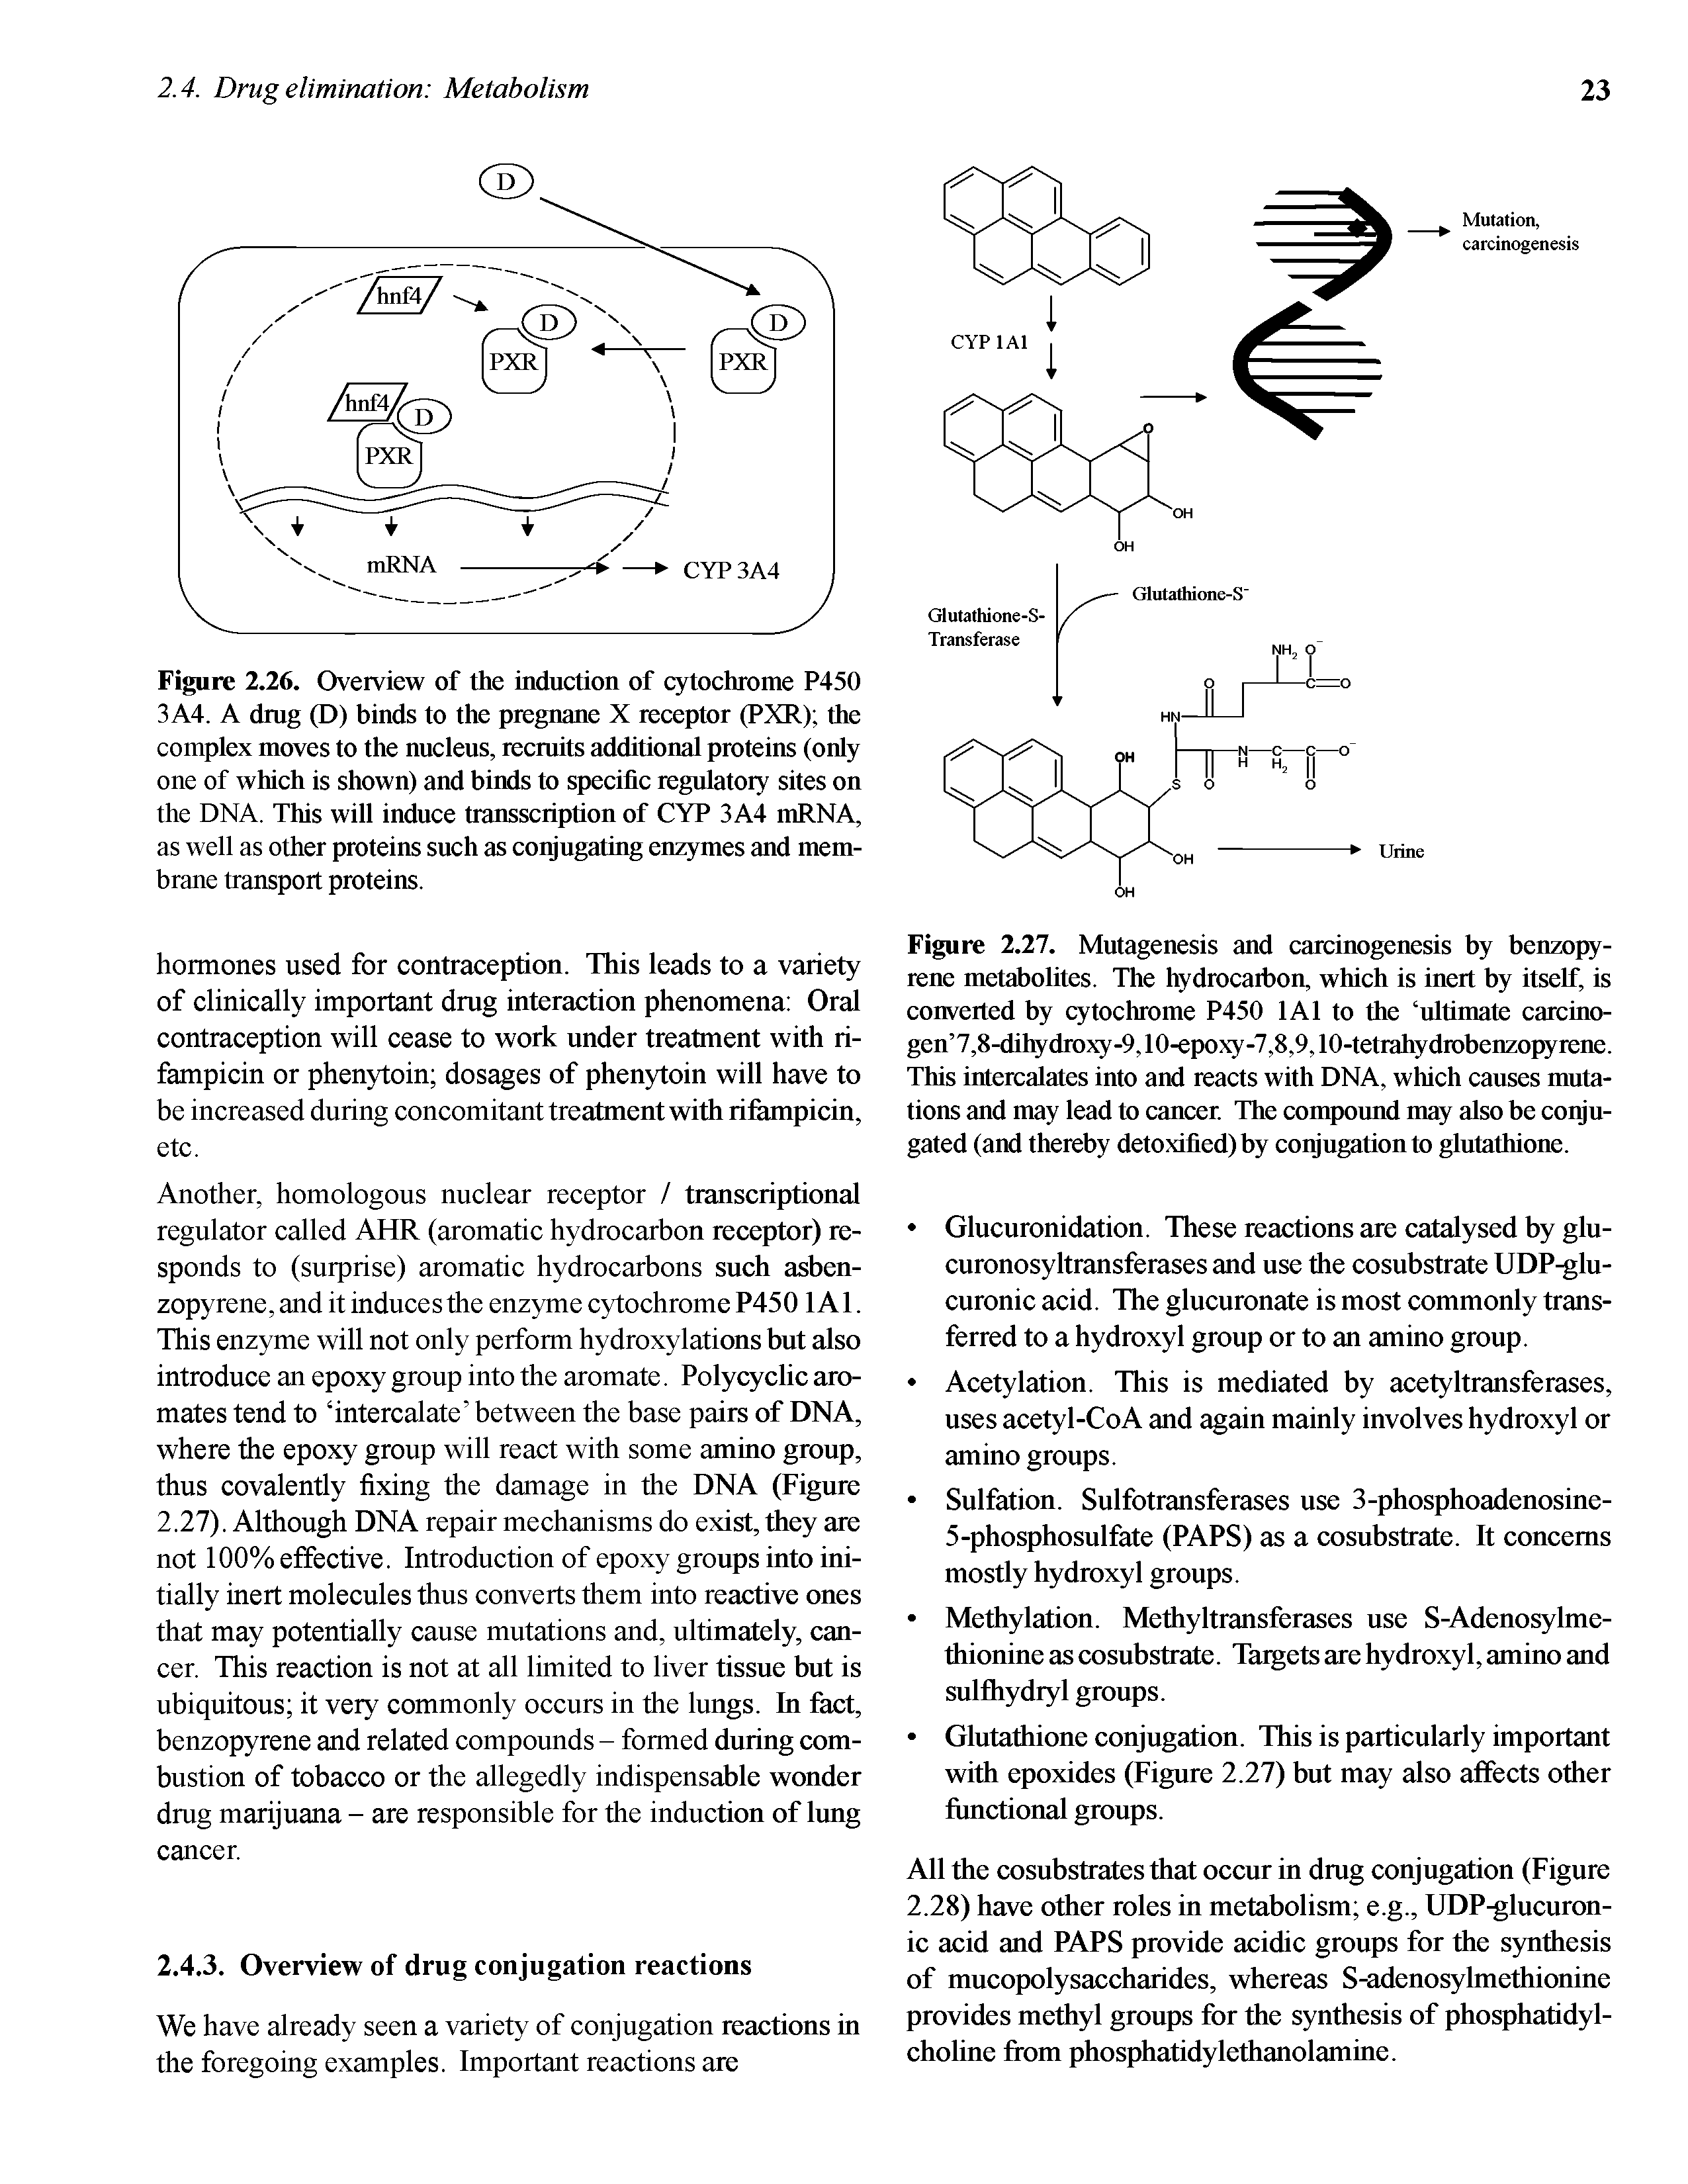 Figure 2.26. Overview of the induction of cytochrome P450 3A4. A drug (D) binds to the pregnane X receptor (PXR) the complex moves to the nucleus, recruits additional proteins (otdy one of which is shown) and binds to specific regulatory sites on the DNA. This will induce transscription of CYP 3A4 ttiRNA, as well as other proteins such as conjugating enzymes and membrane transport proteins.